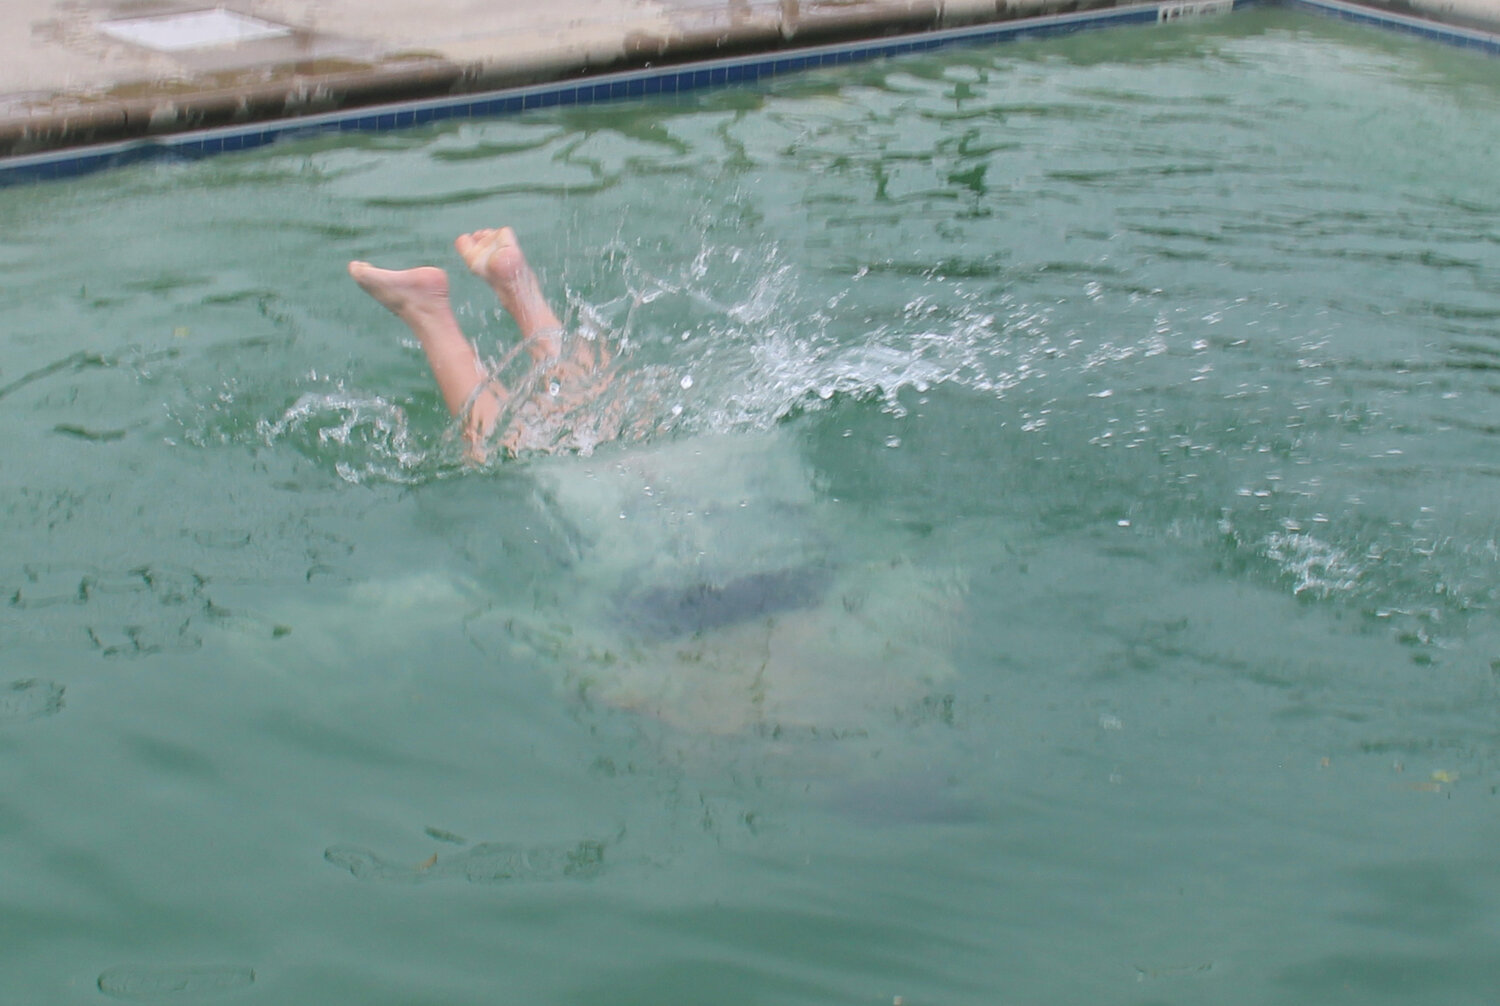 Nathaniel Kutsch dives in head first with nary a splash as he prepares to retrieve the brick from the bottom of the 12-foot pool.